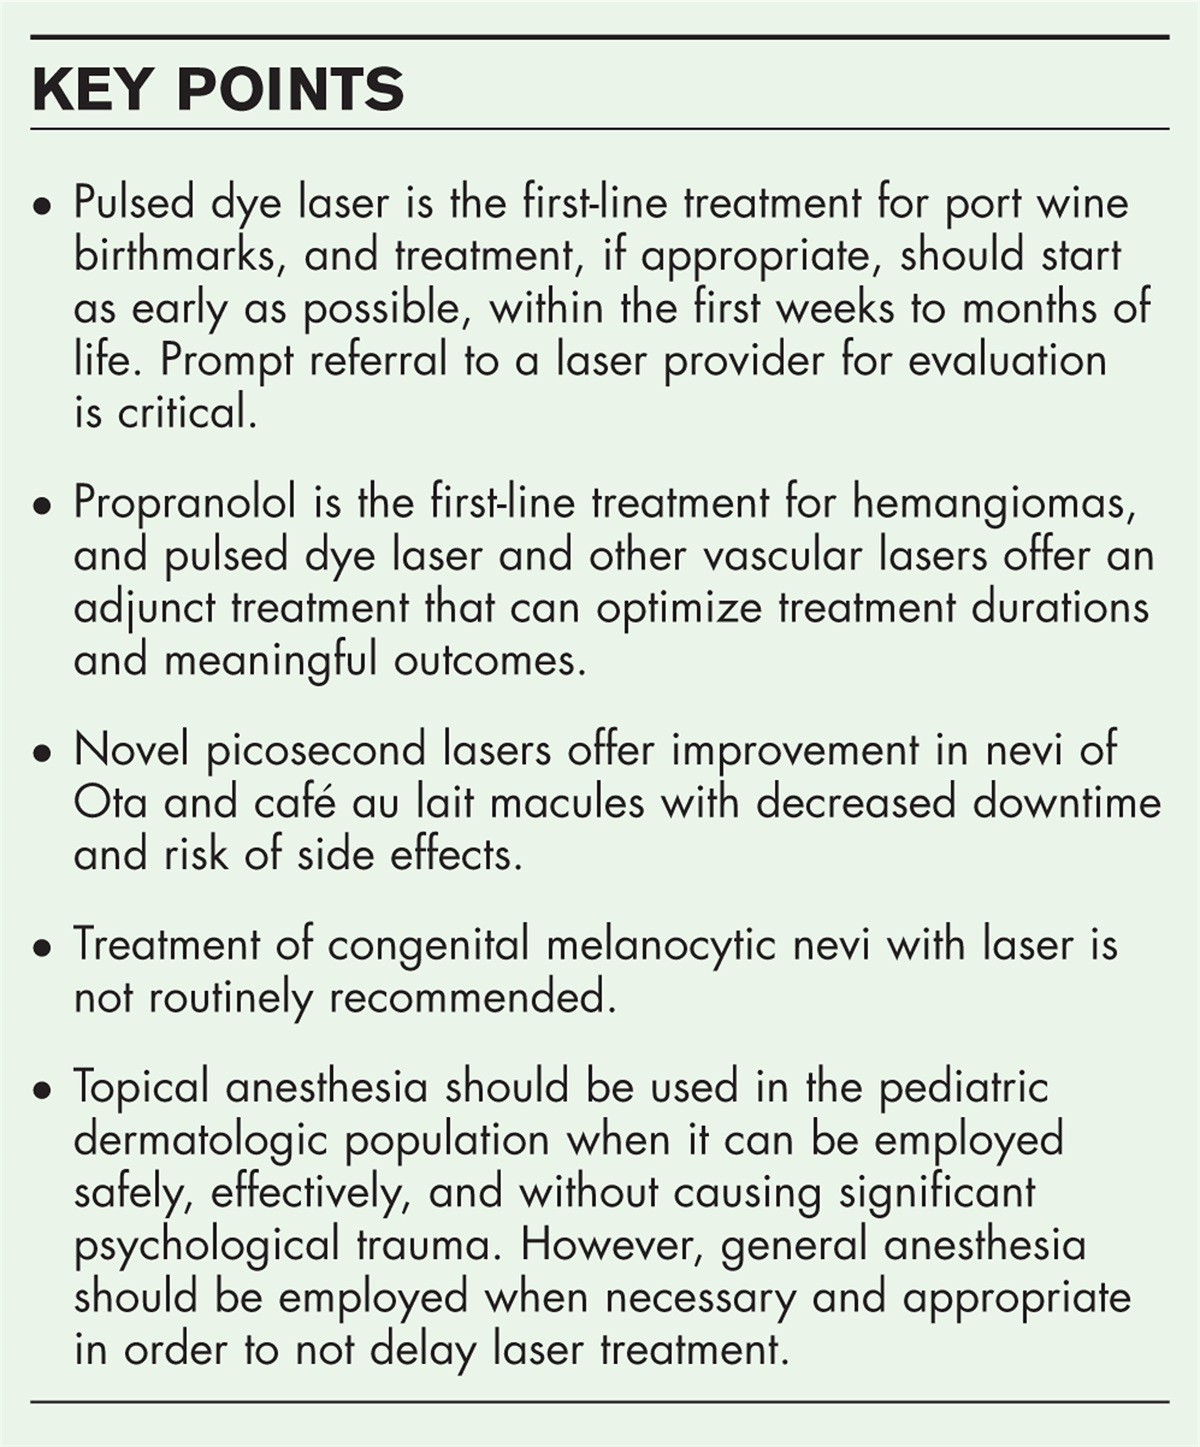 Update on lasers in pediatric dermatology: how primary care providers can help patients and families navigate appropriate treatment options and timelines